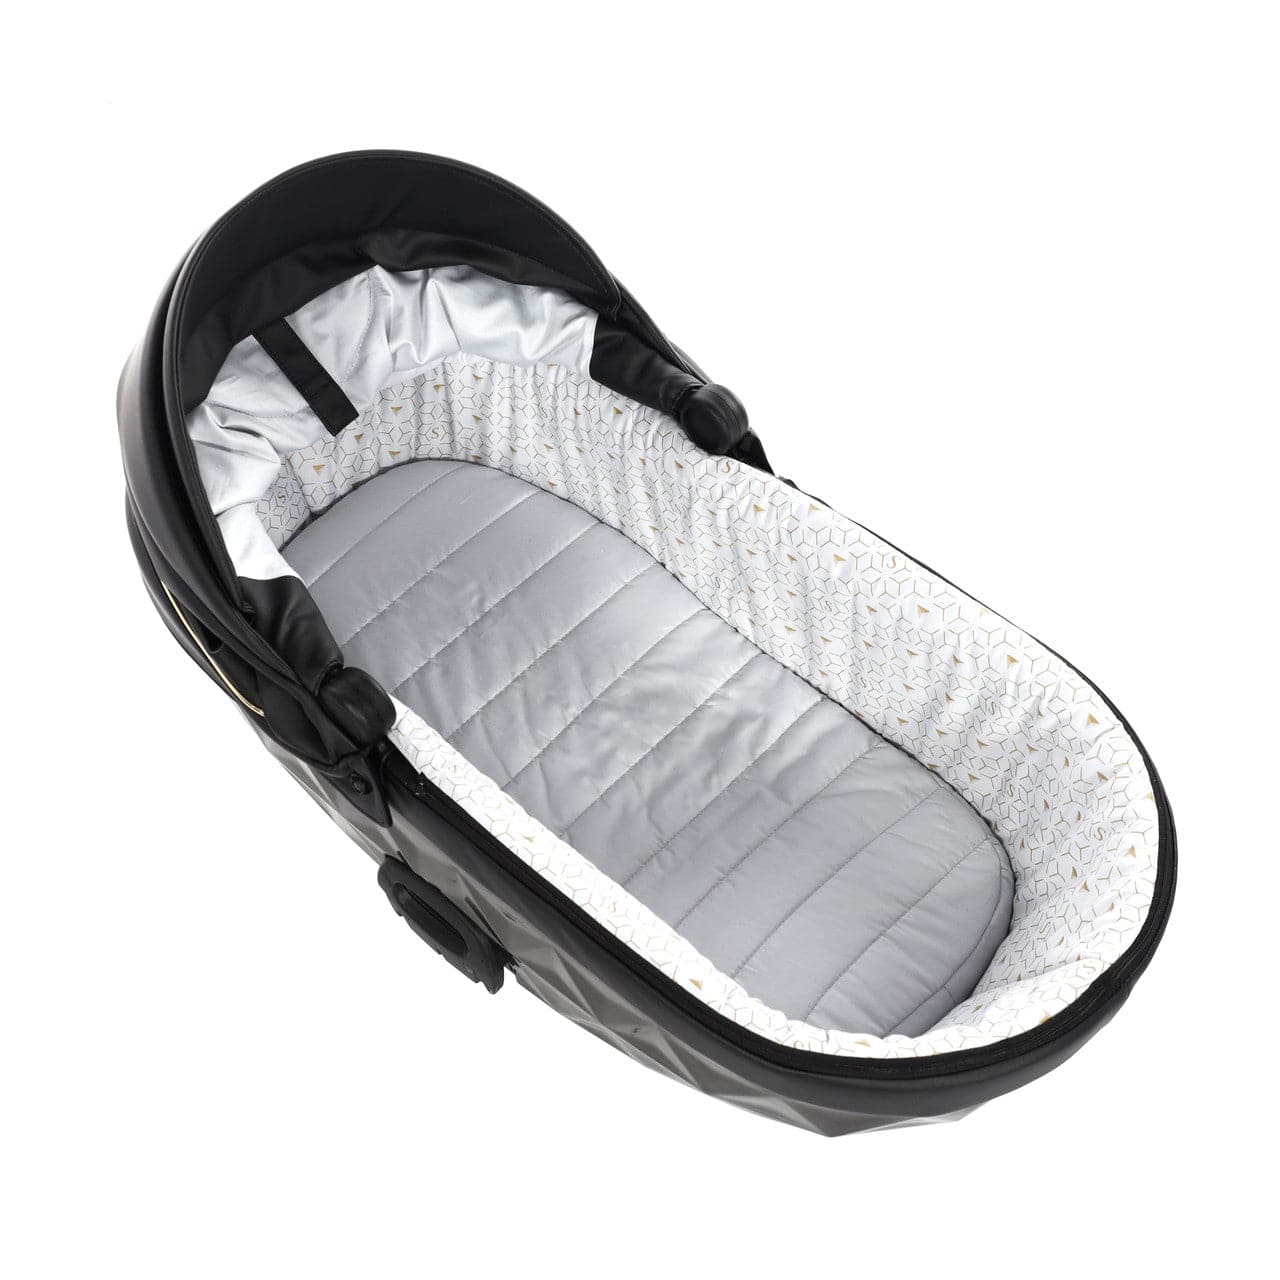 Junama S-Class 2 In 1 Pram - Black -  | For Your Little One